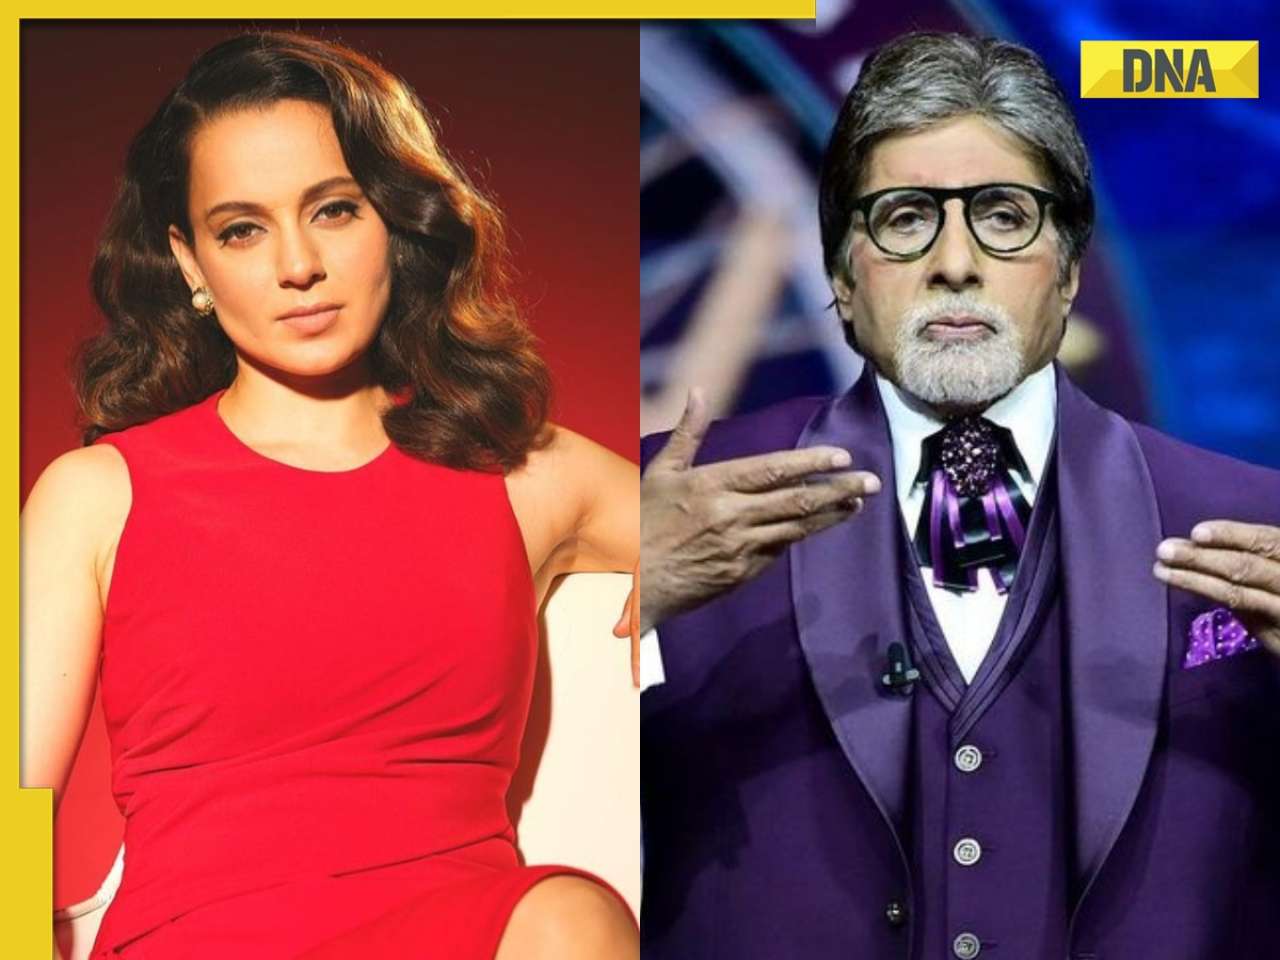 'Hey bhagwan!': Kangana Ranaut says she is most respected person in Bollywood after Amitabh Bachchan, gets trolled